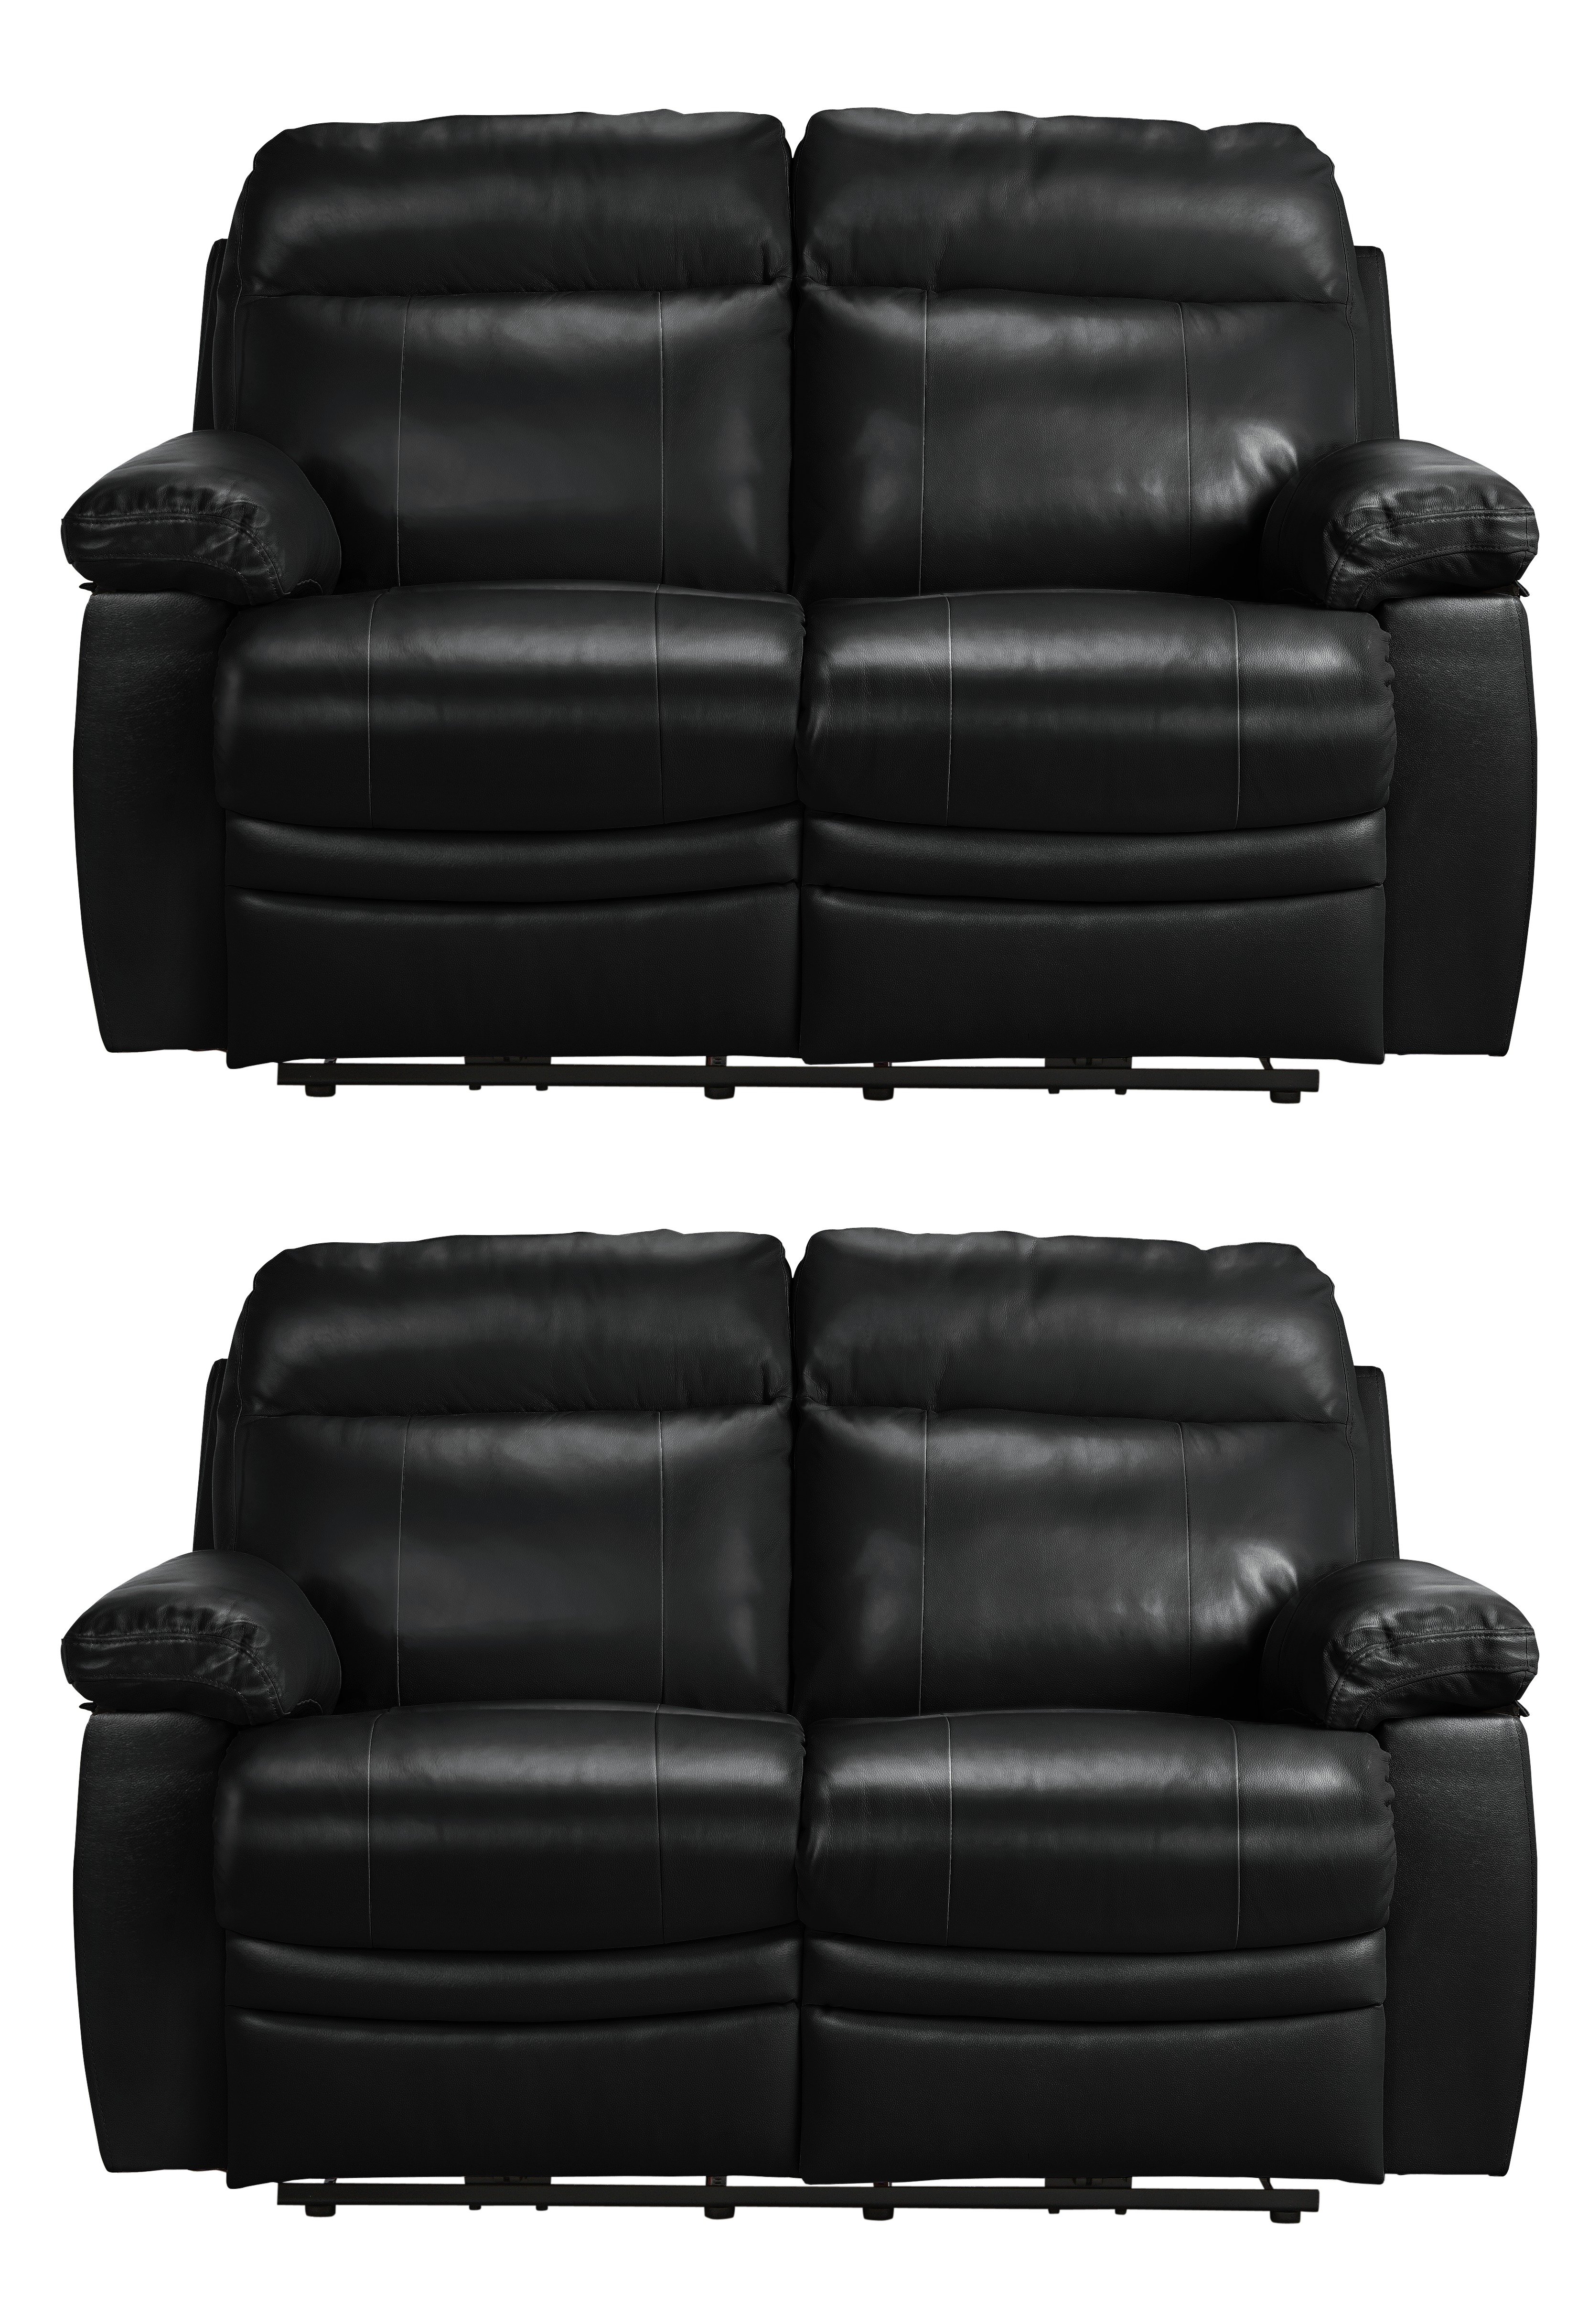 Argos Home Paolo Pair of 2 Seater Power Recliner Sofa -Black